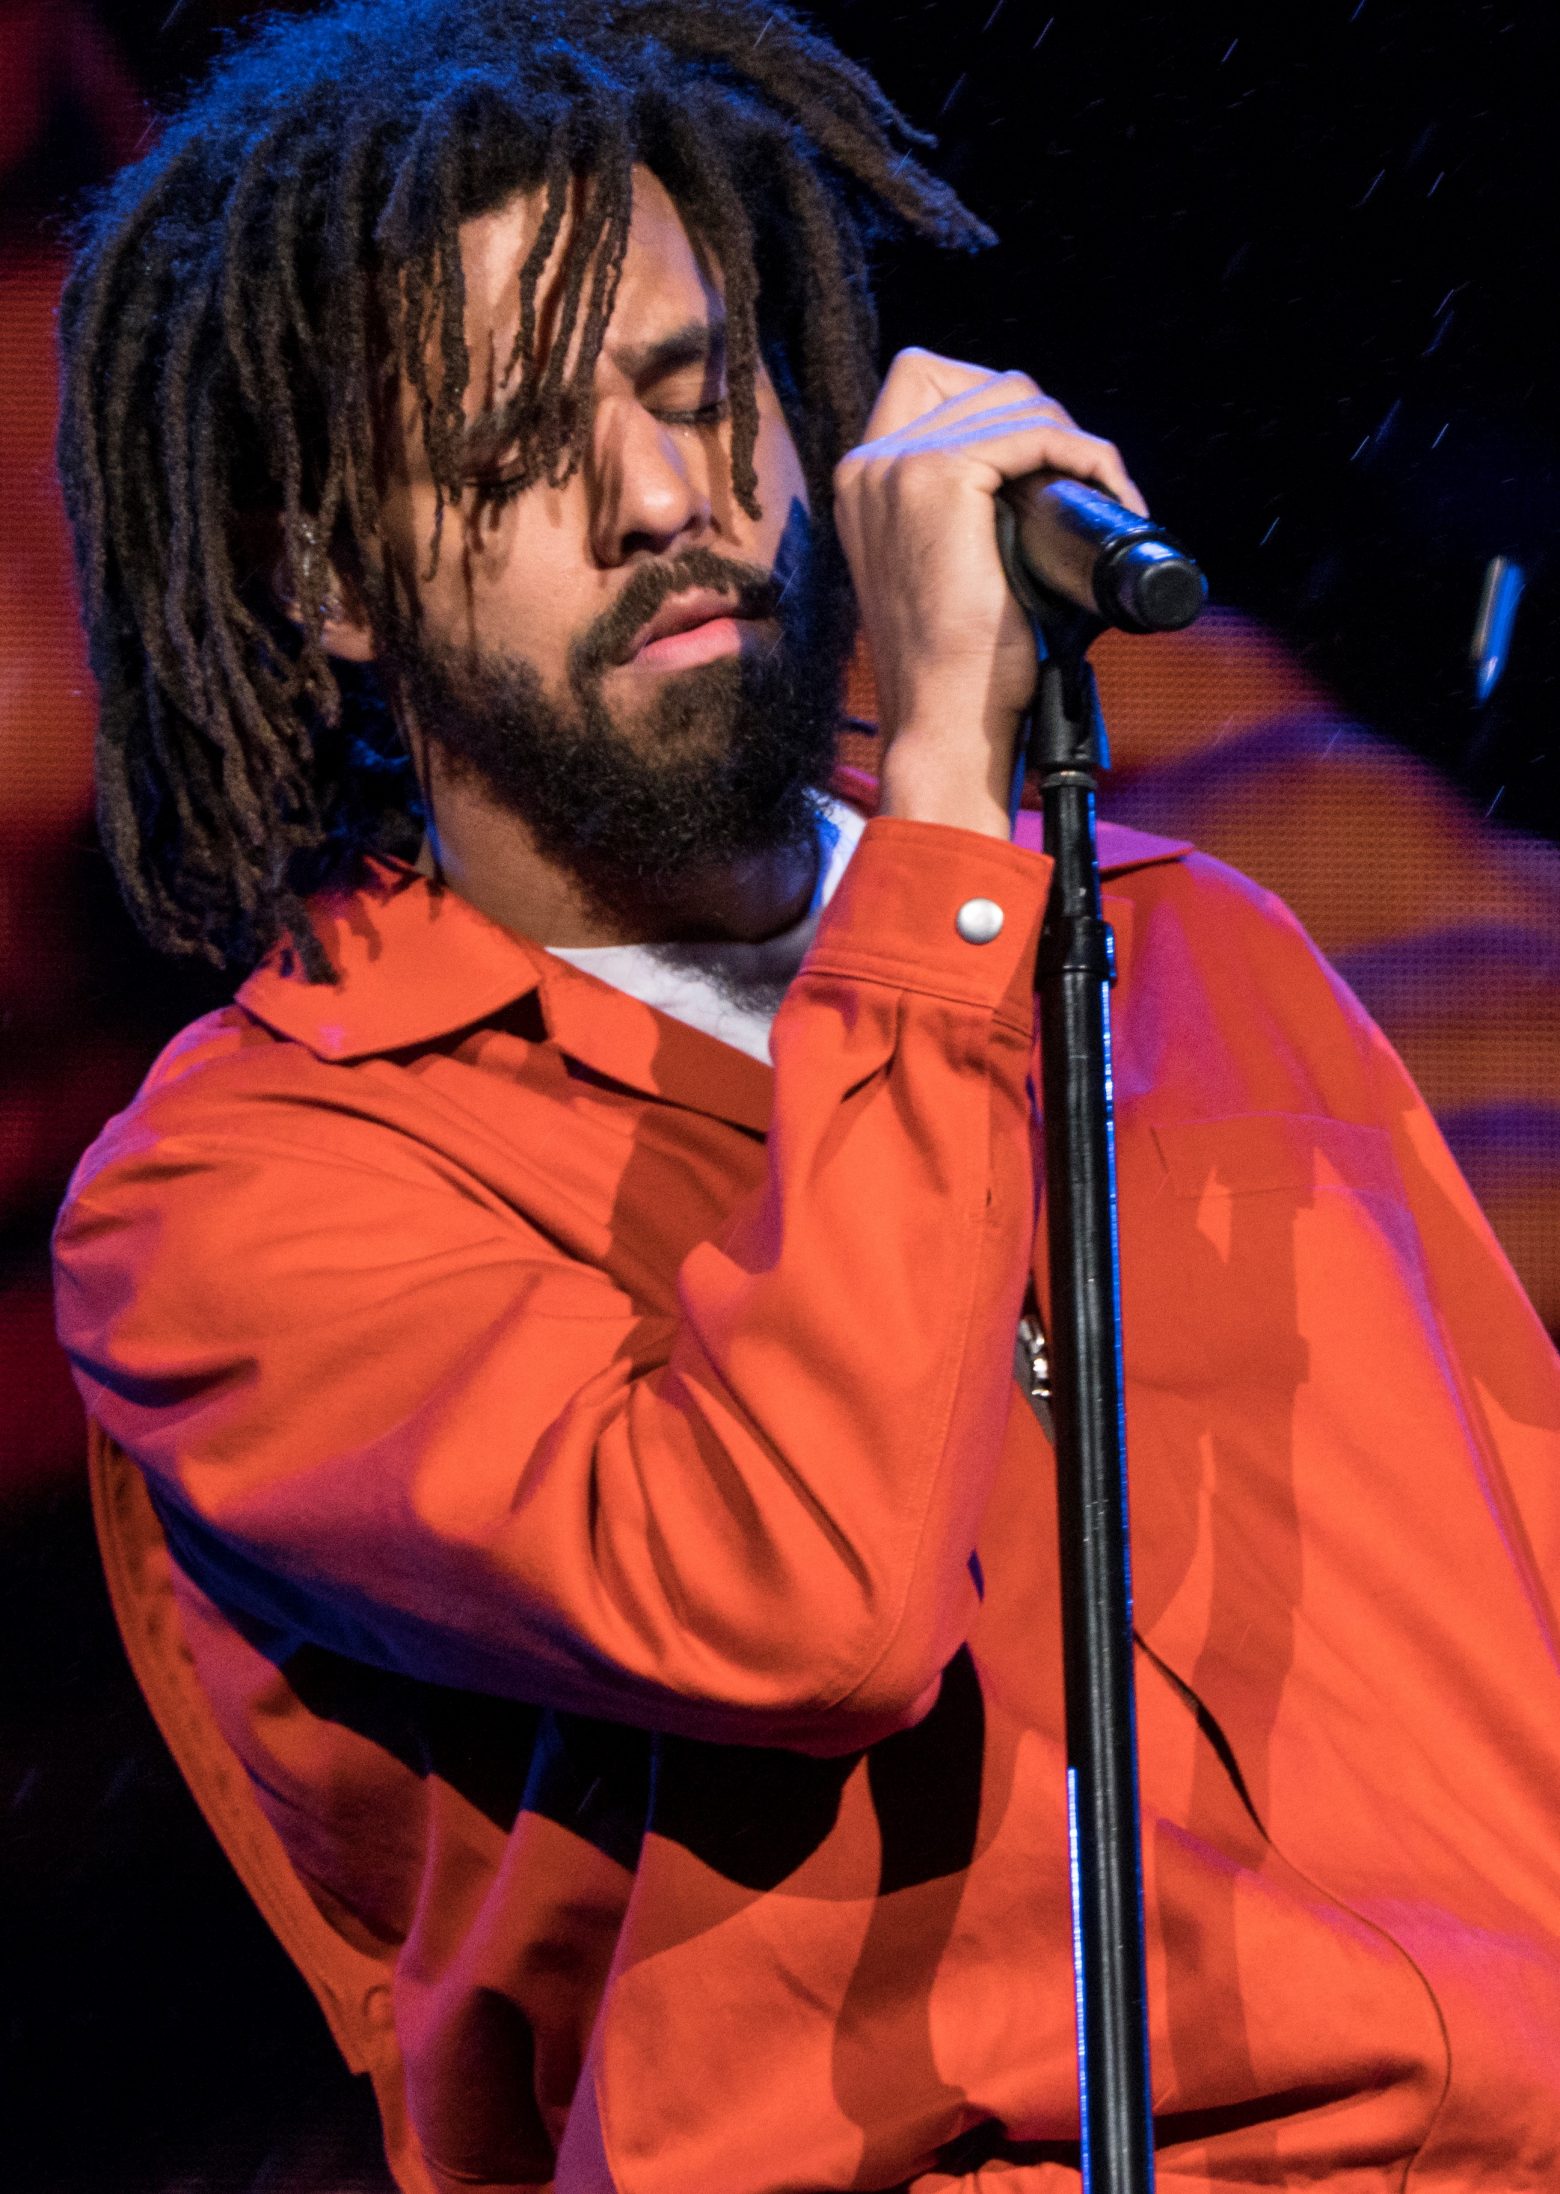 Rapstar J. Cole is set to play in the Canadian Elite Basketball League.